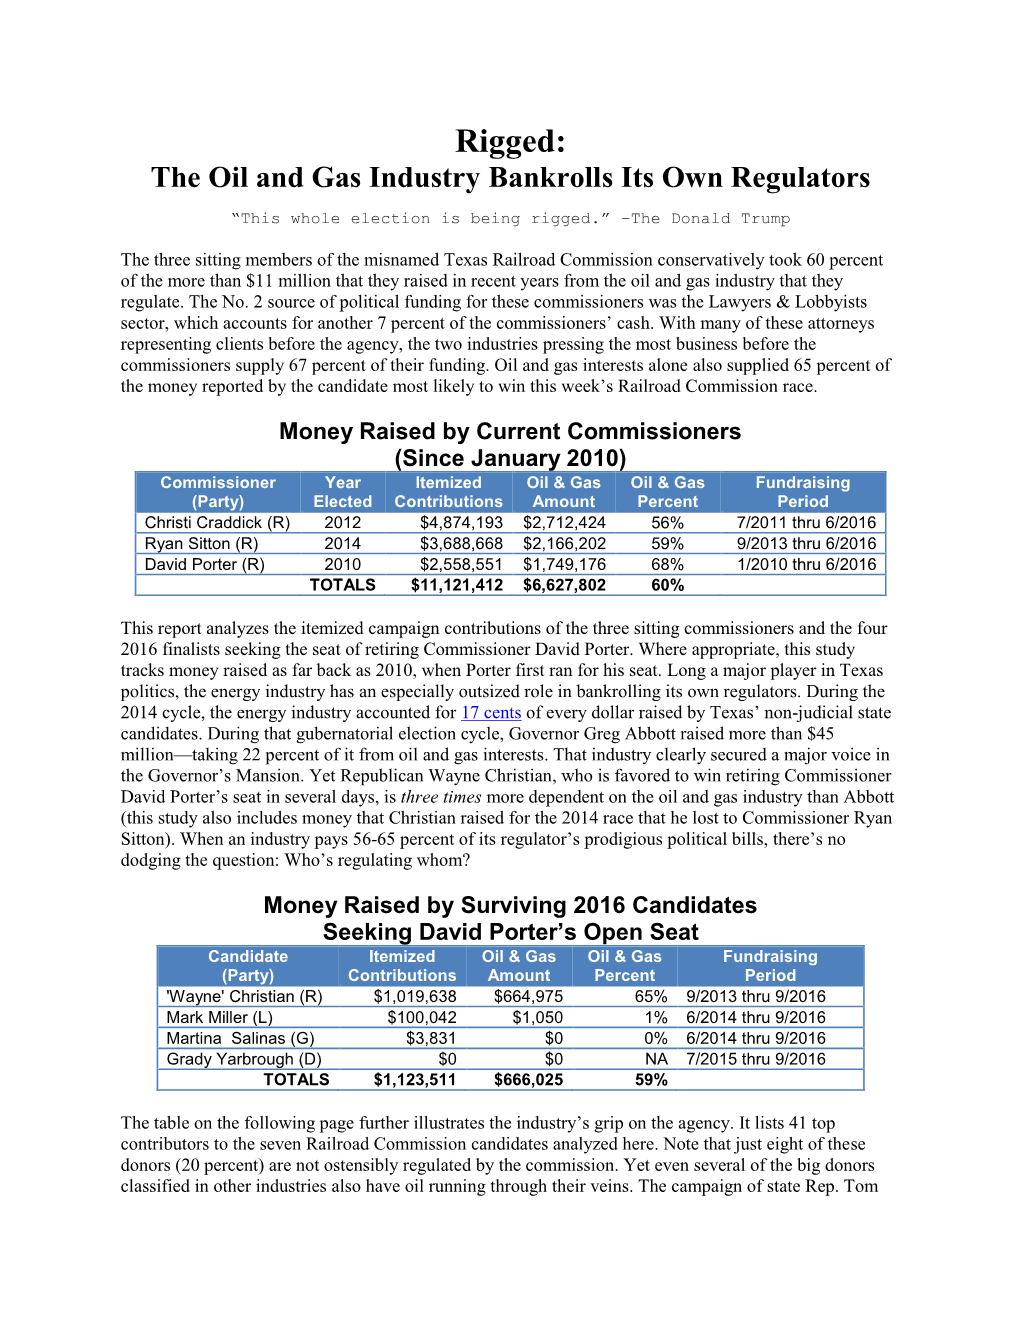 Rigged: the Oil and Gas Industry Bankrolls Its Own Regulators